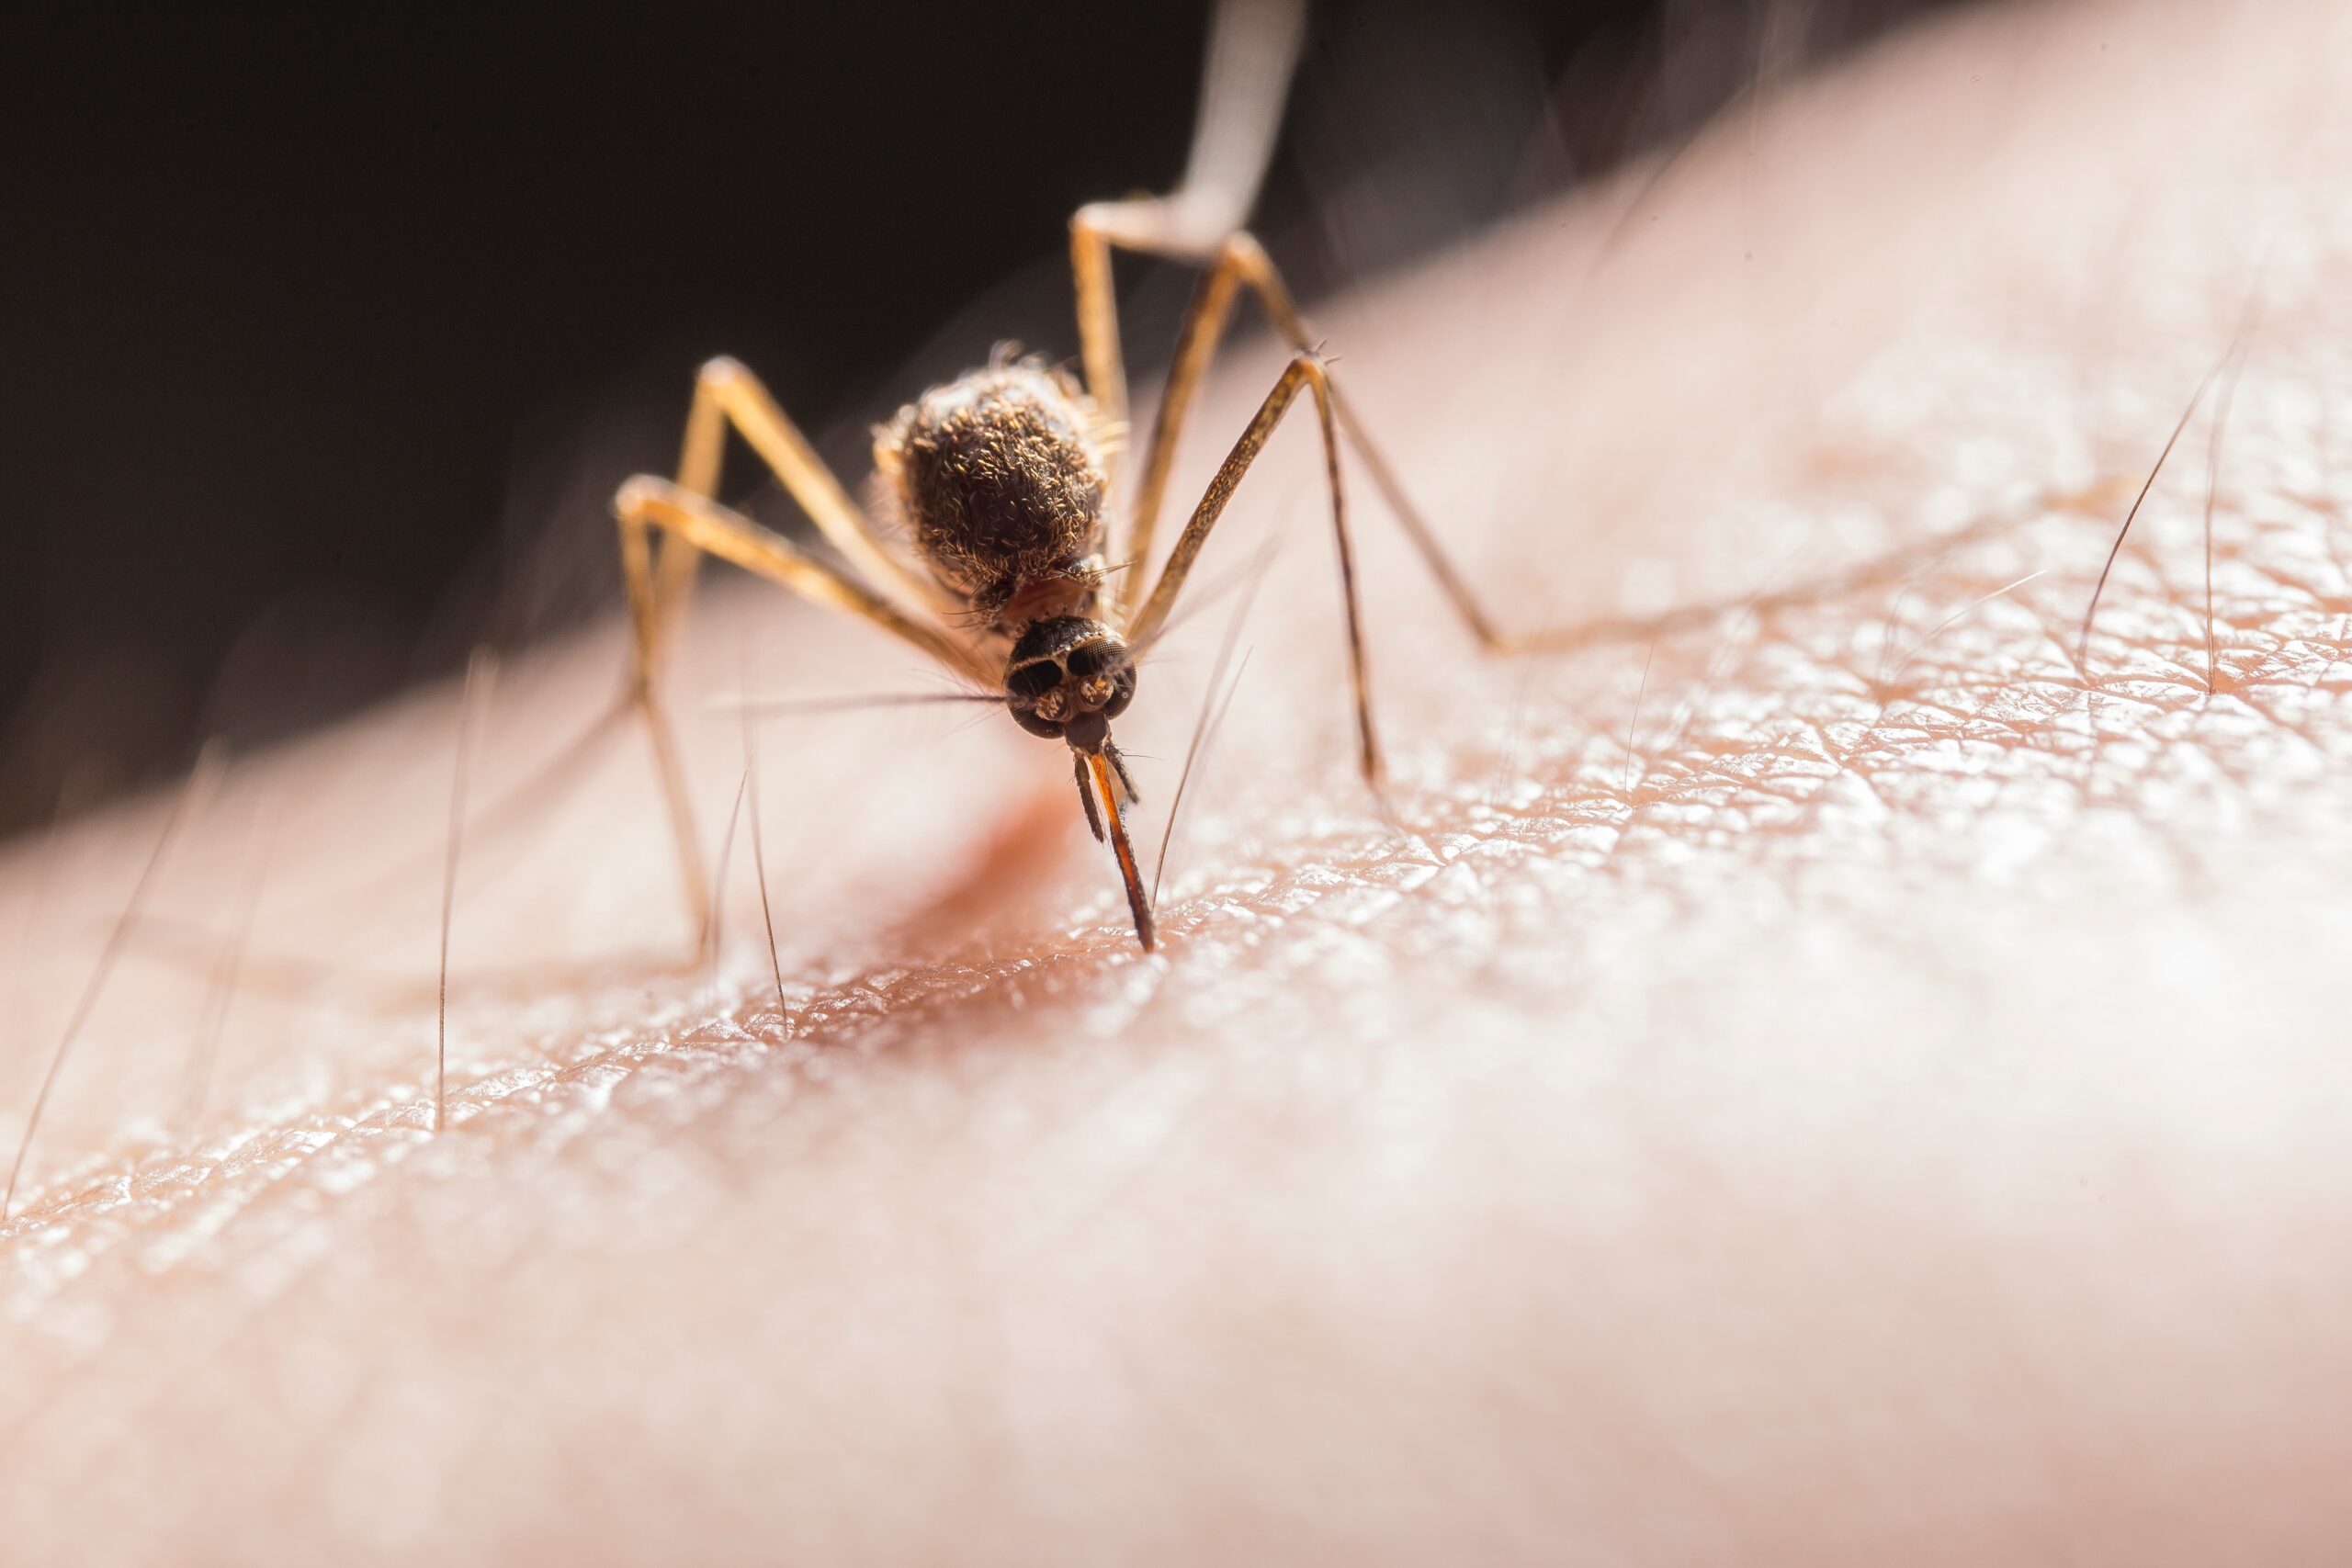 The rising temperatures and extended summers associated with climate change are paving the way for disease-carrying mosquitoes to make themselves at home